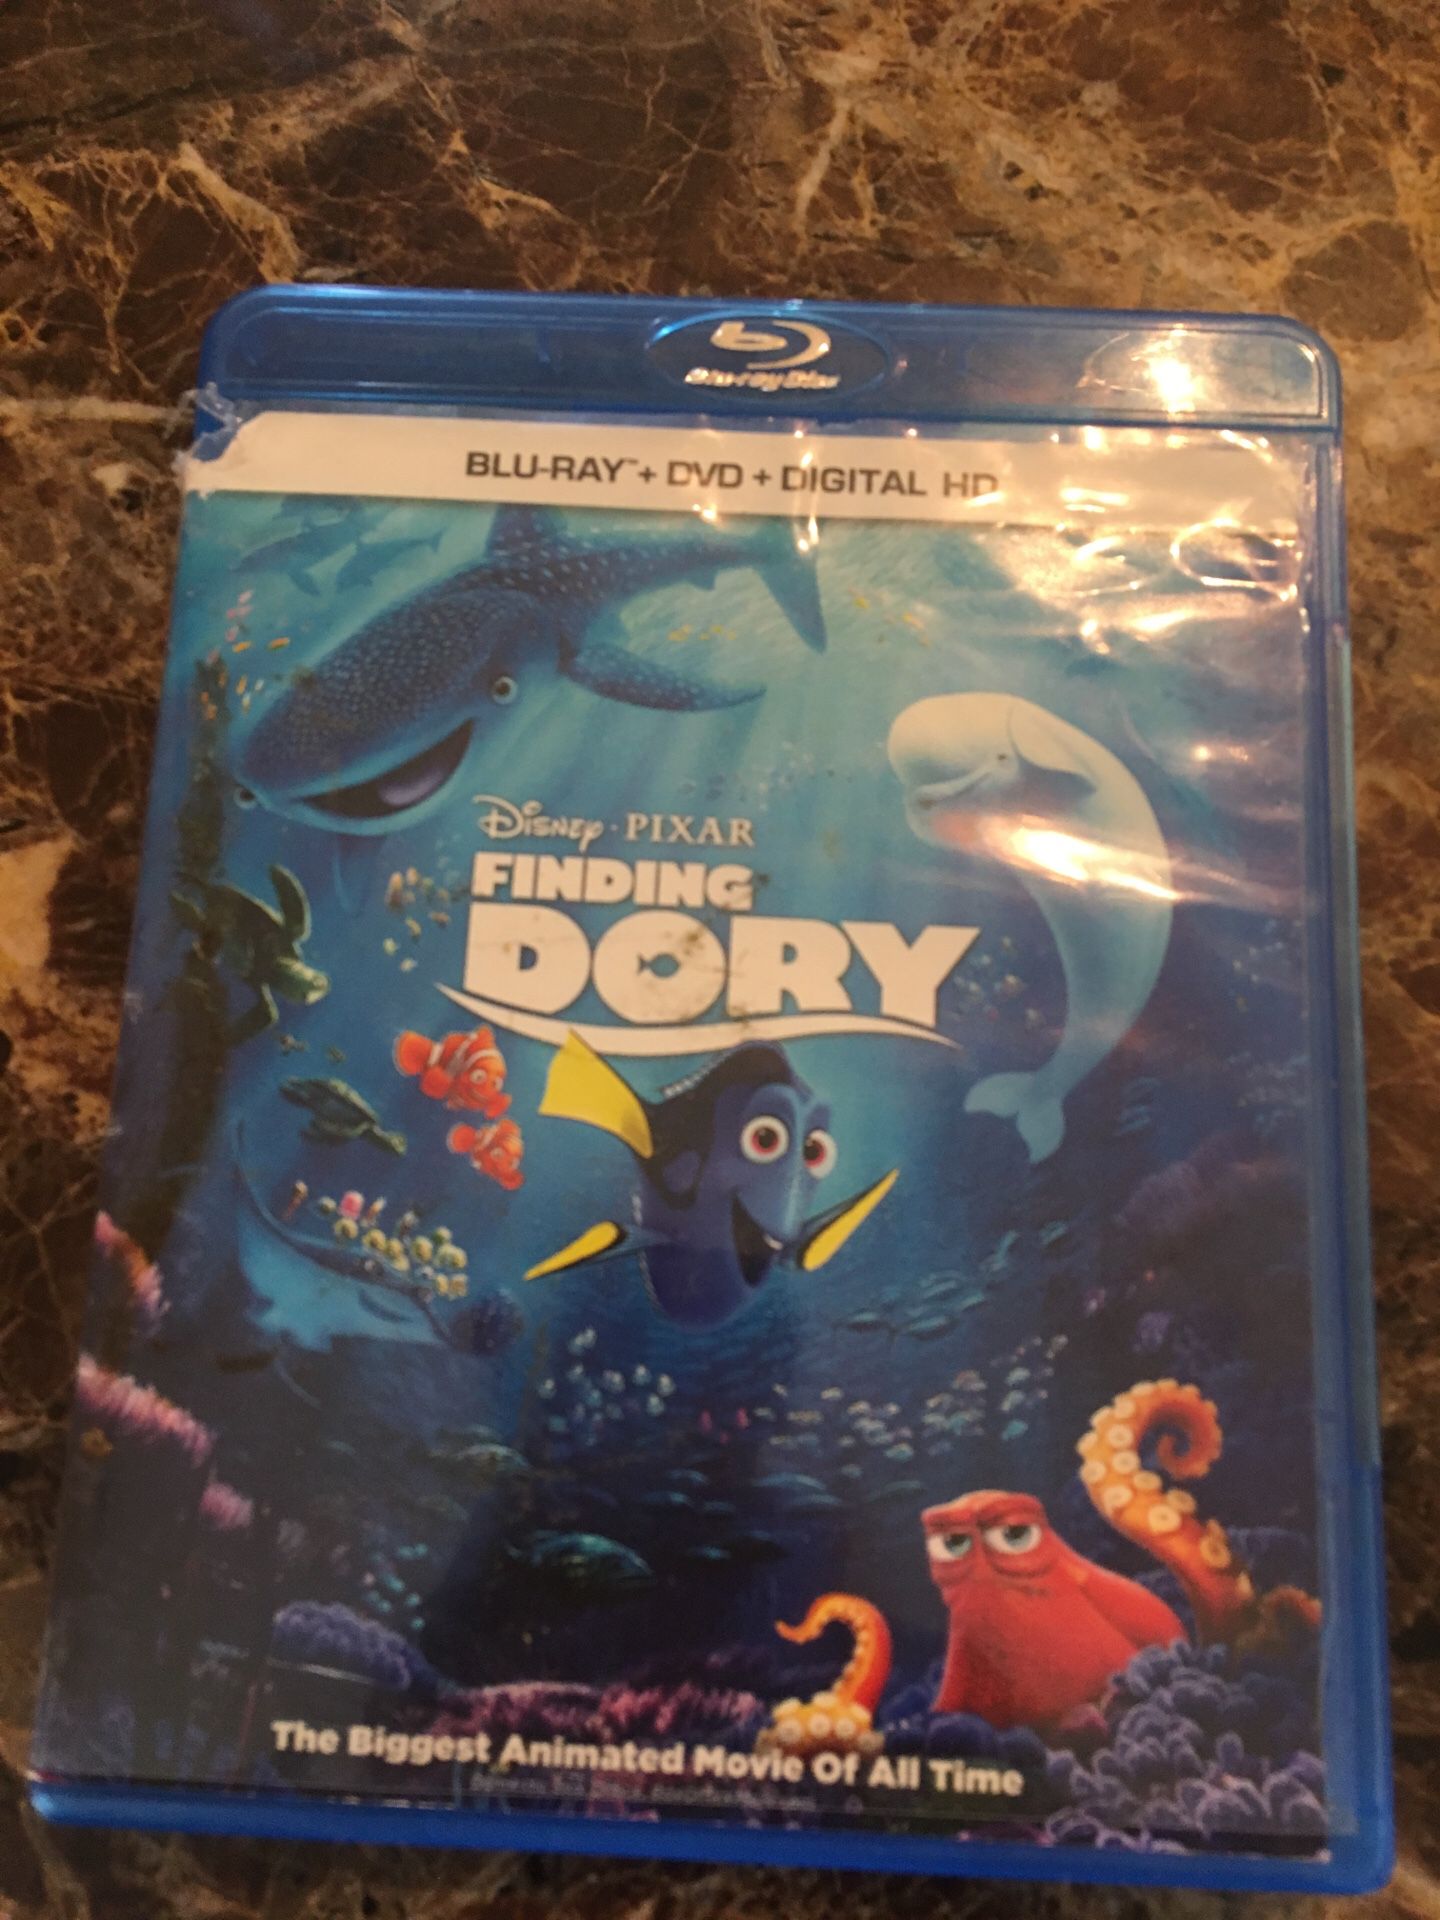 FINDING DORY cds